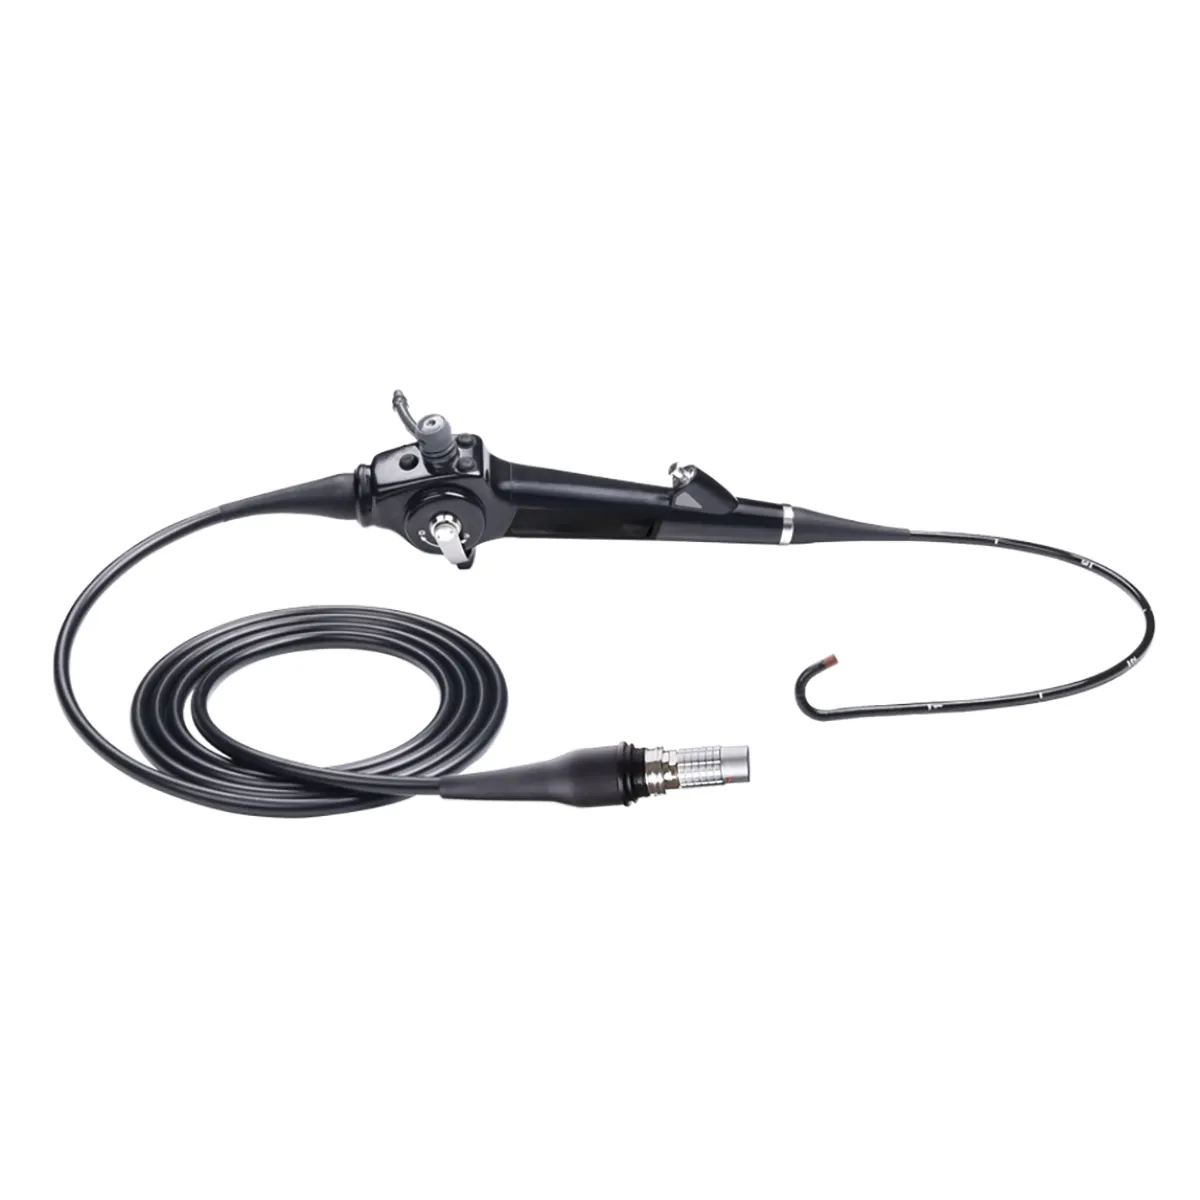 flexible video choledochoscope endoscope for PTCS surgery/diagnosis and treatment of gallstones choledochoscope price